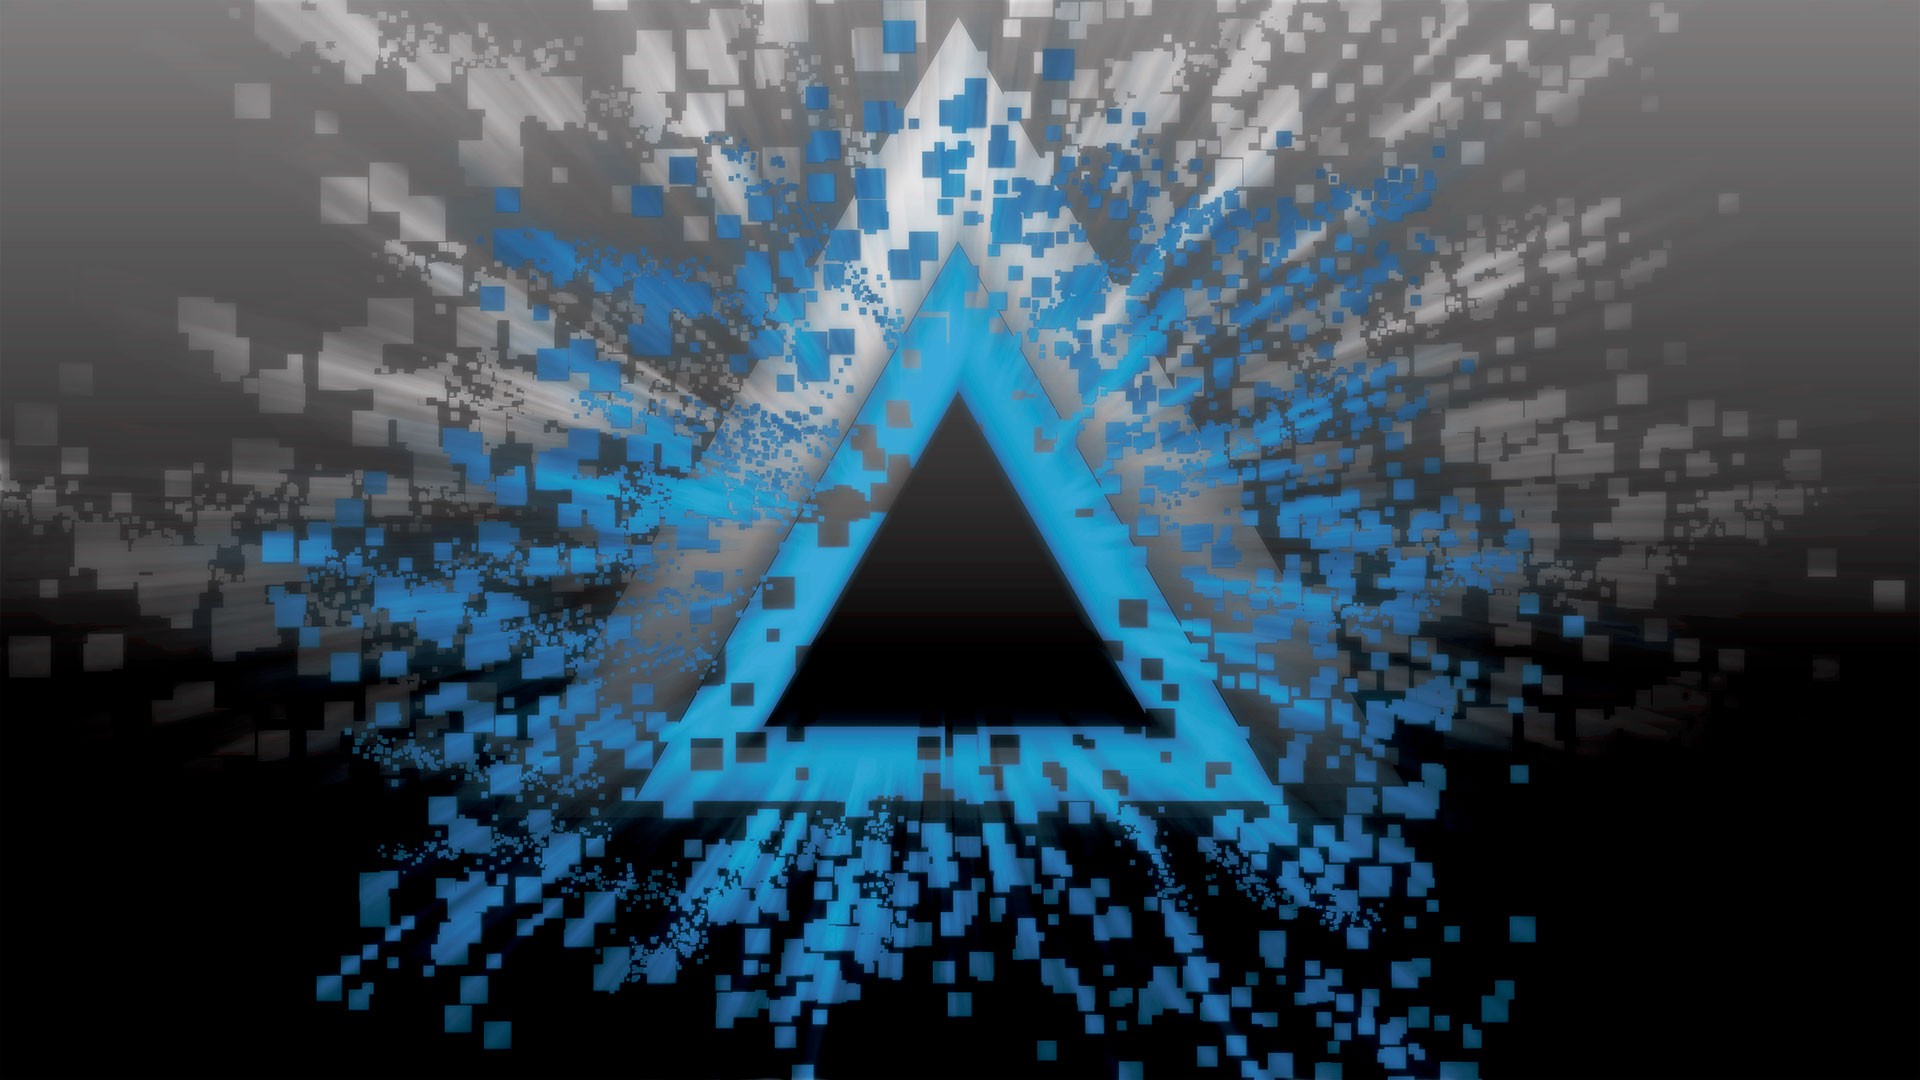 Pixelated Triangles Wallpaper